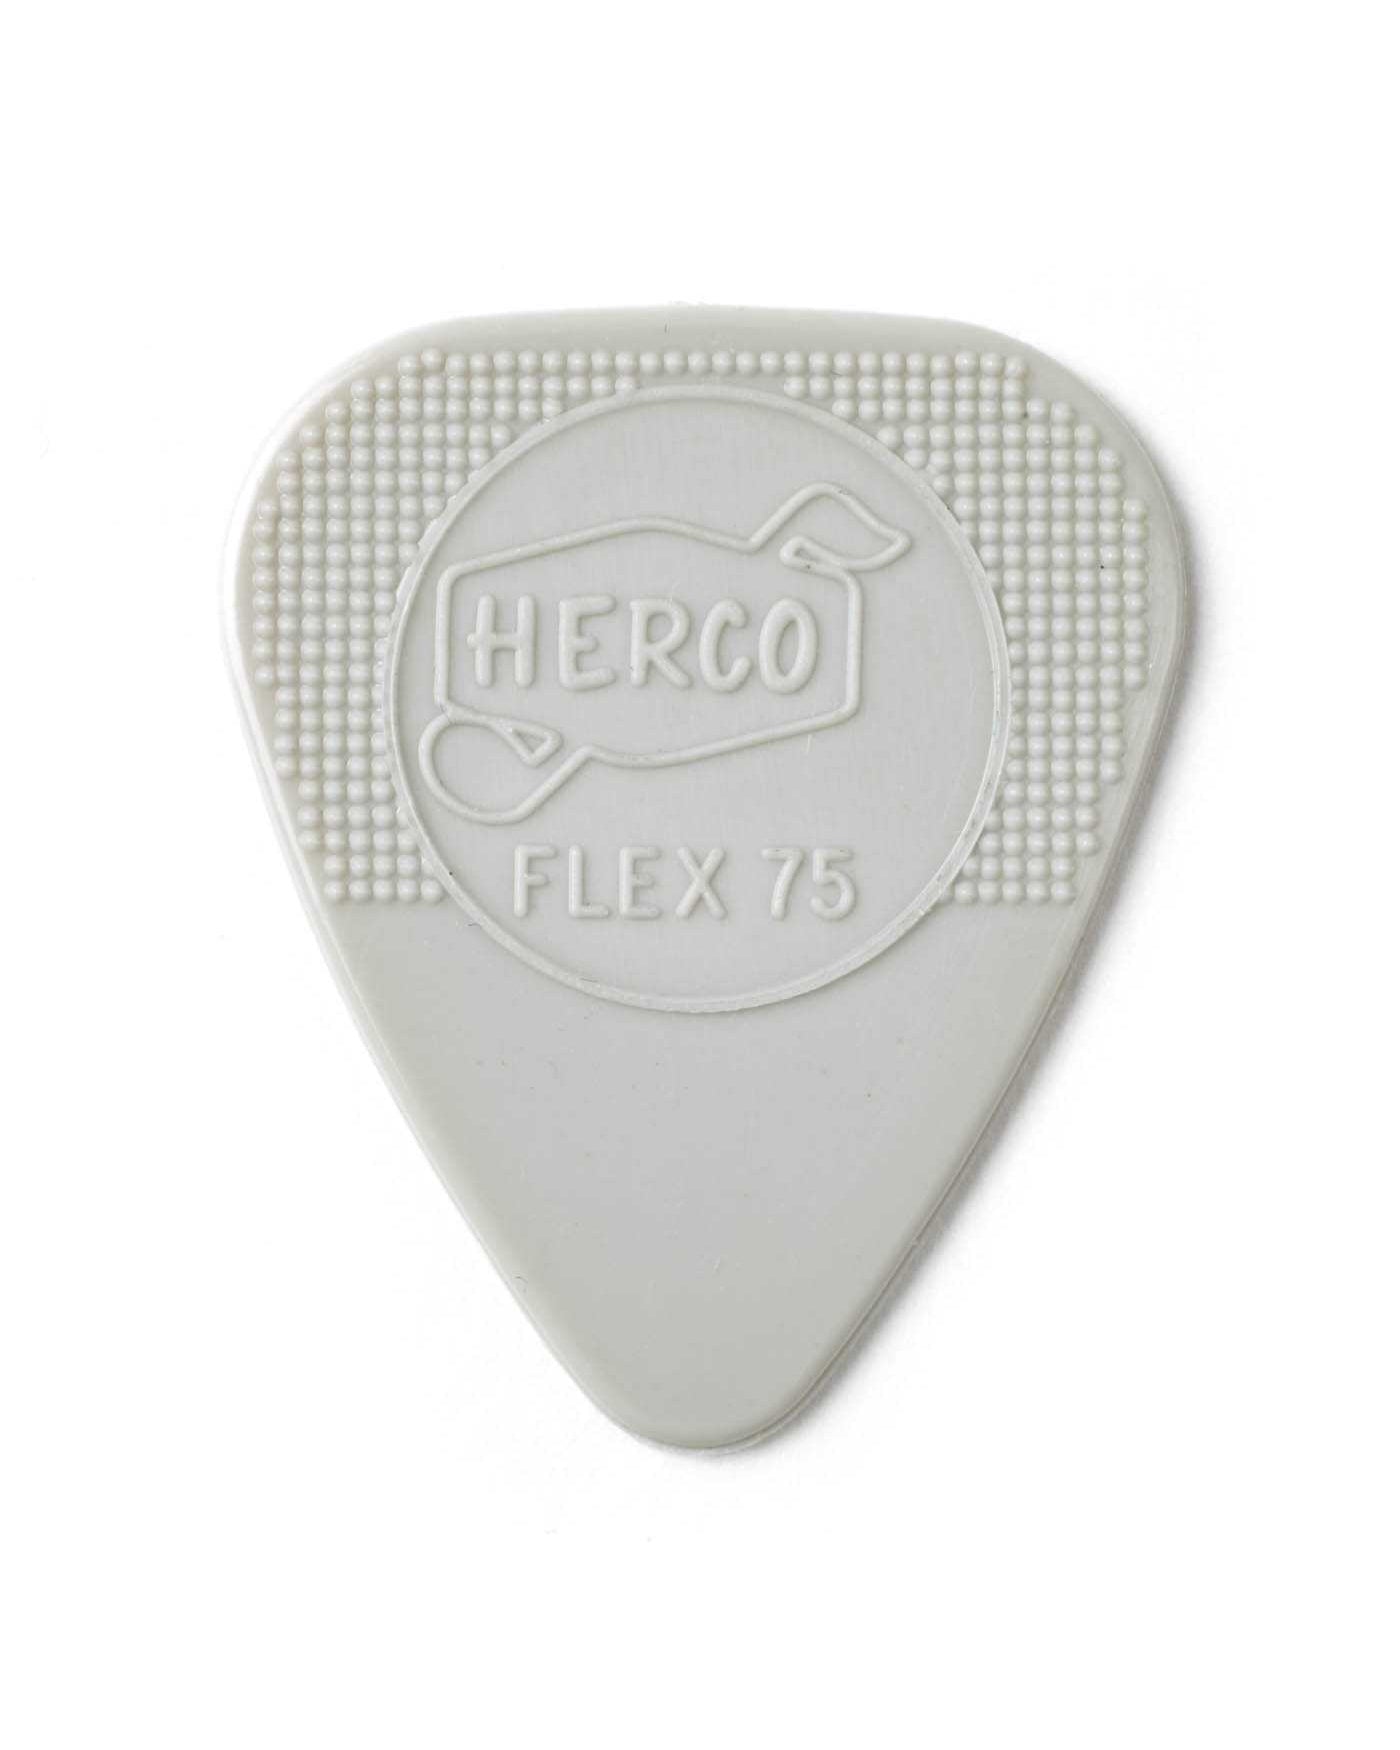 Image 1 of Herco Flex 75 "Holy Grail" Flatpick, 6 Pick Pack - SKU# HE777 : Product Type Accessories & Parts : Elderly Instruments